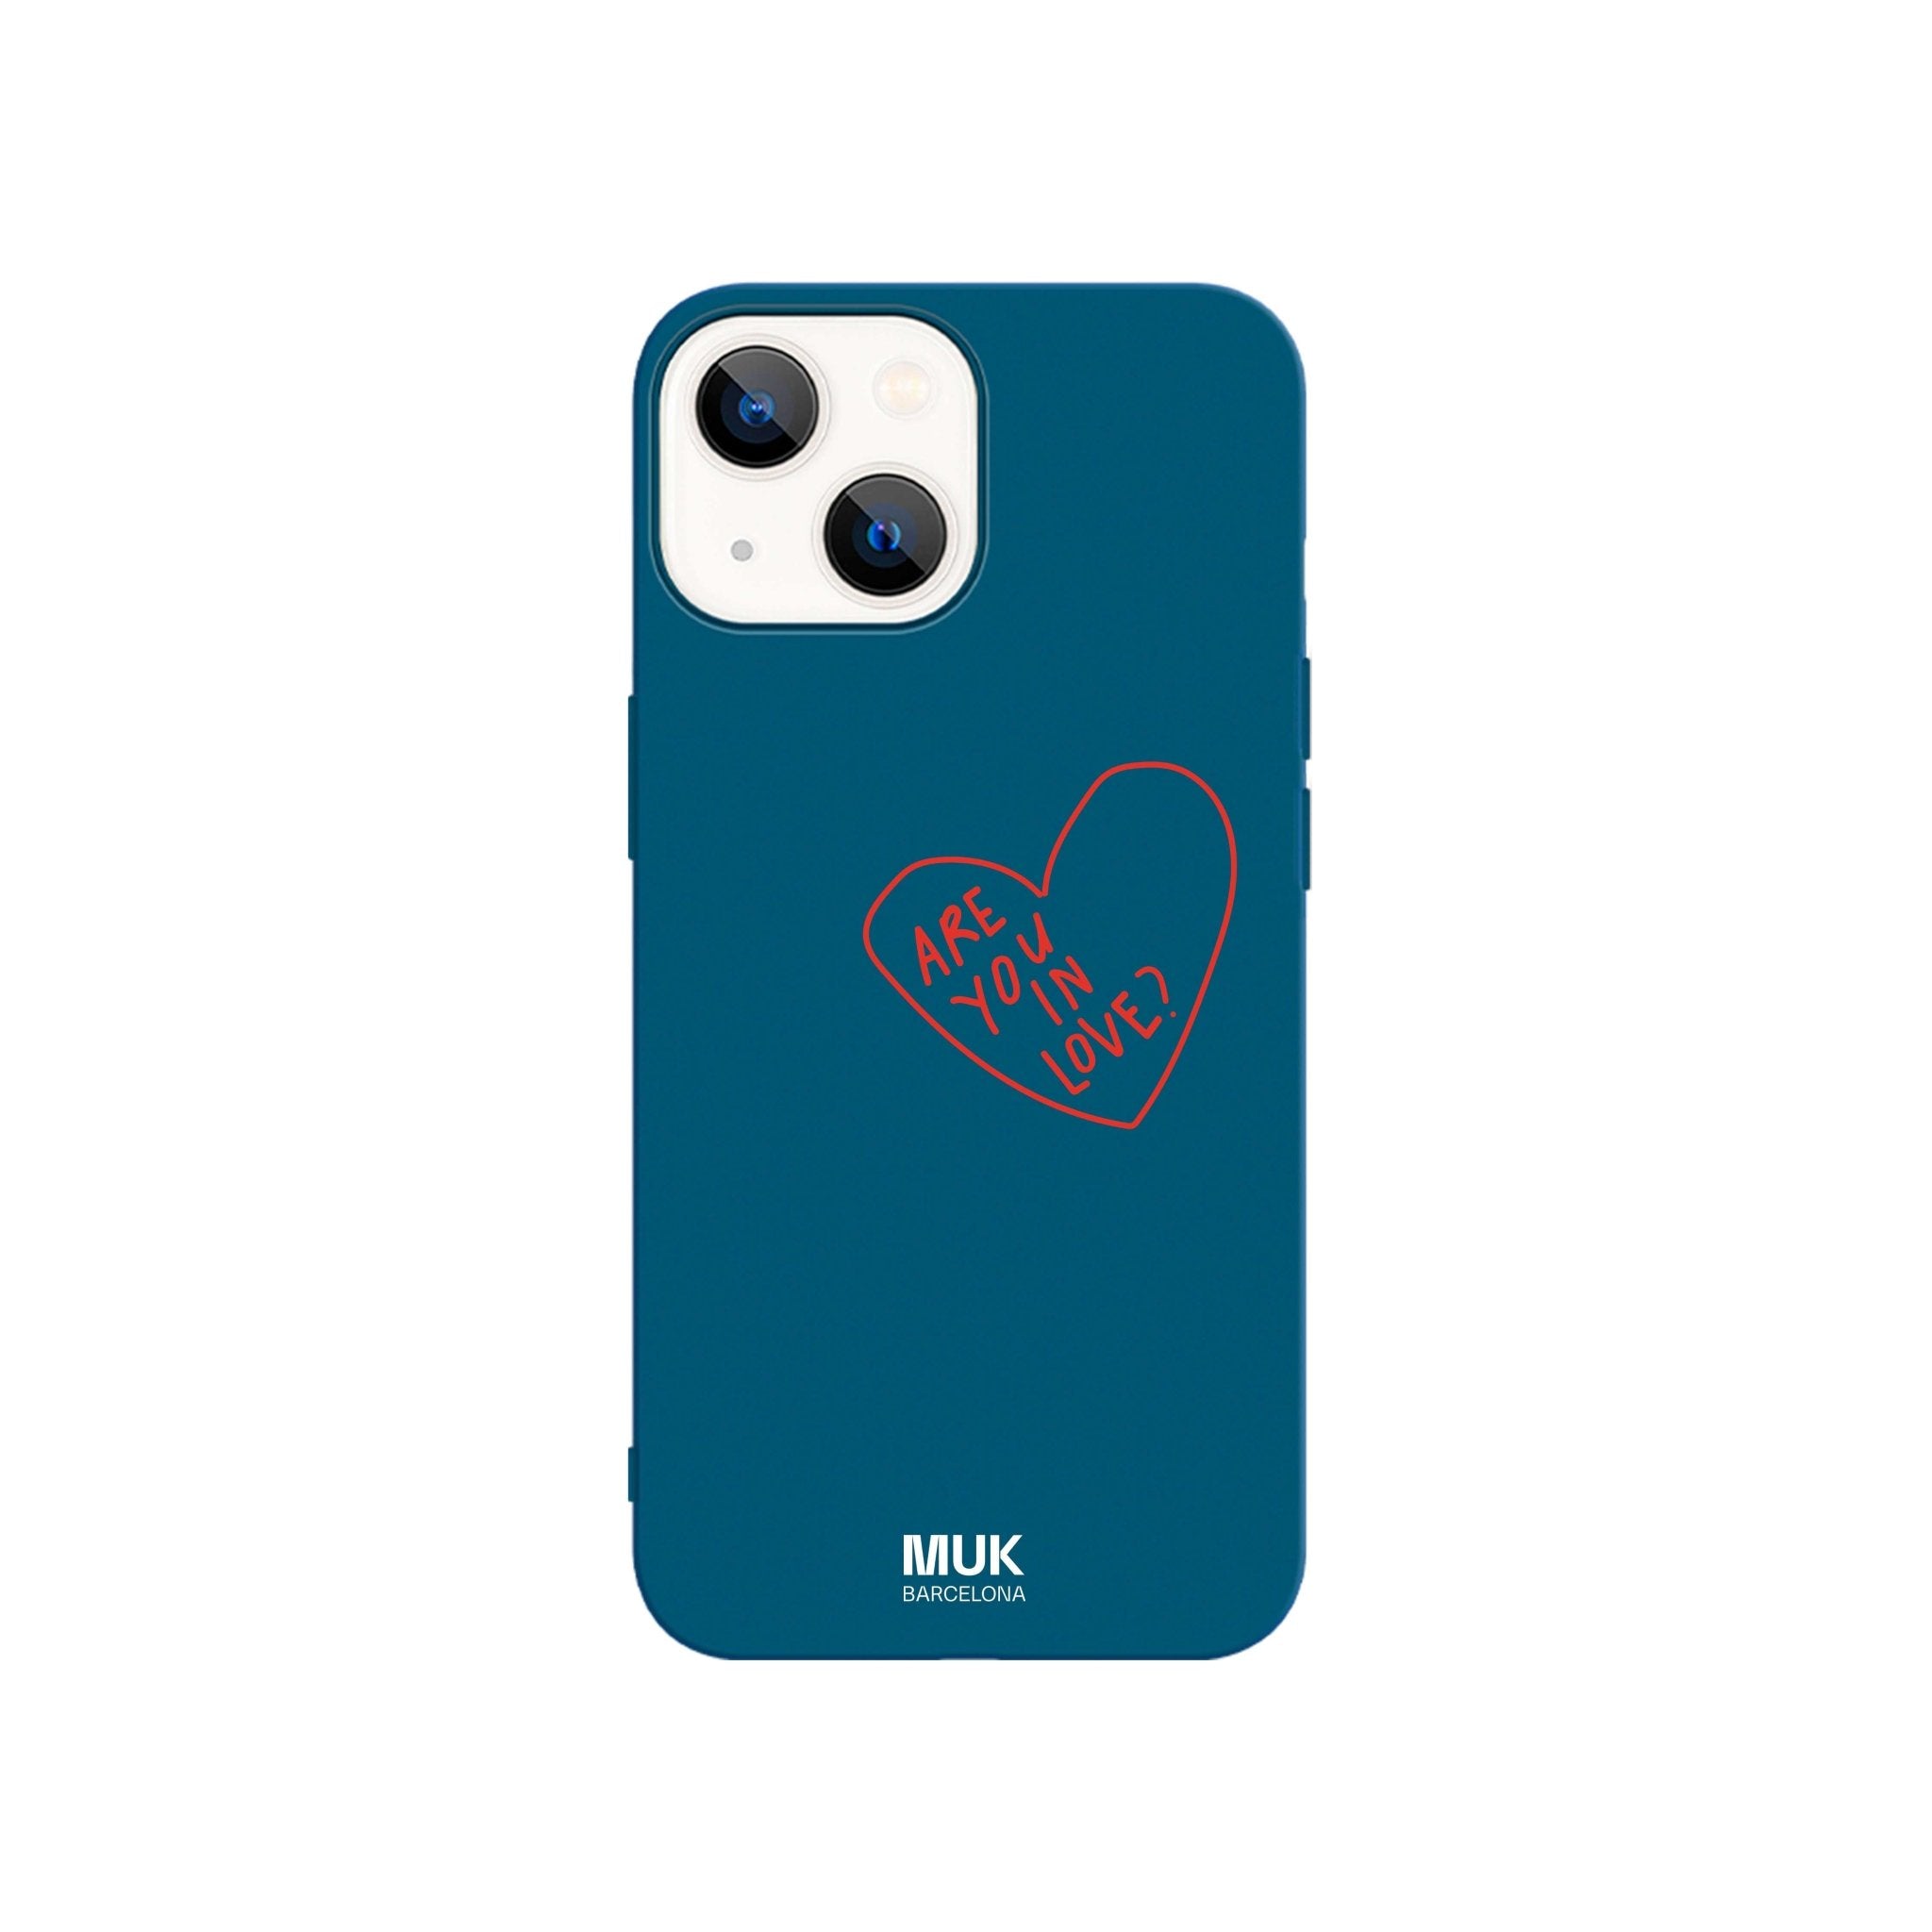 Blue TPU phone case with red heart and text "Are you in love?"
